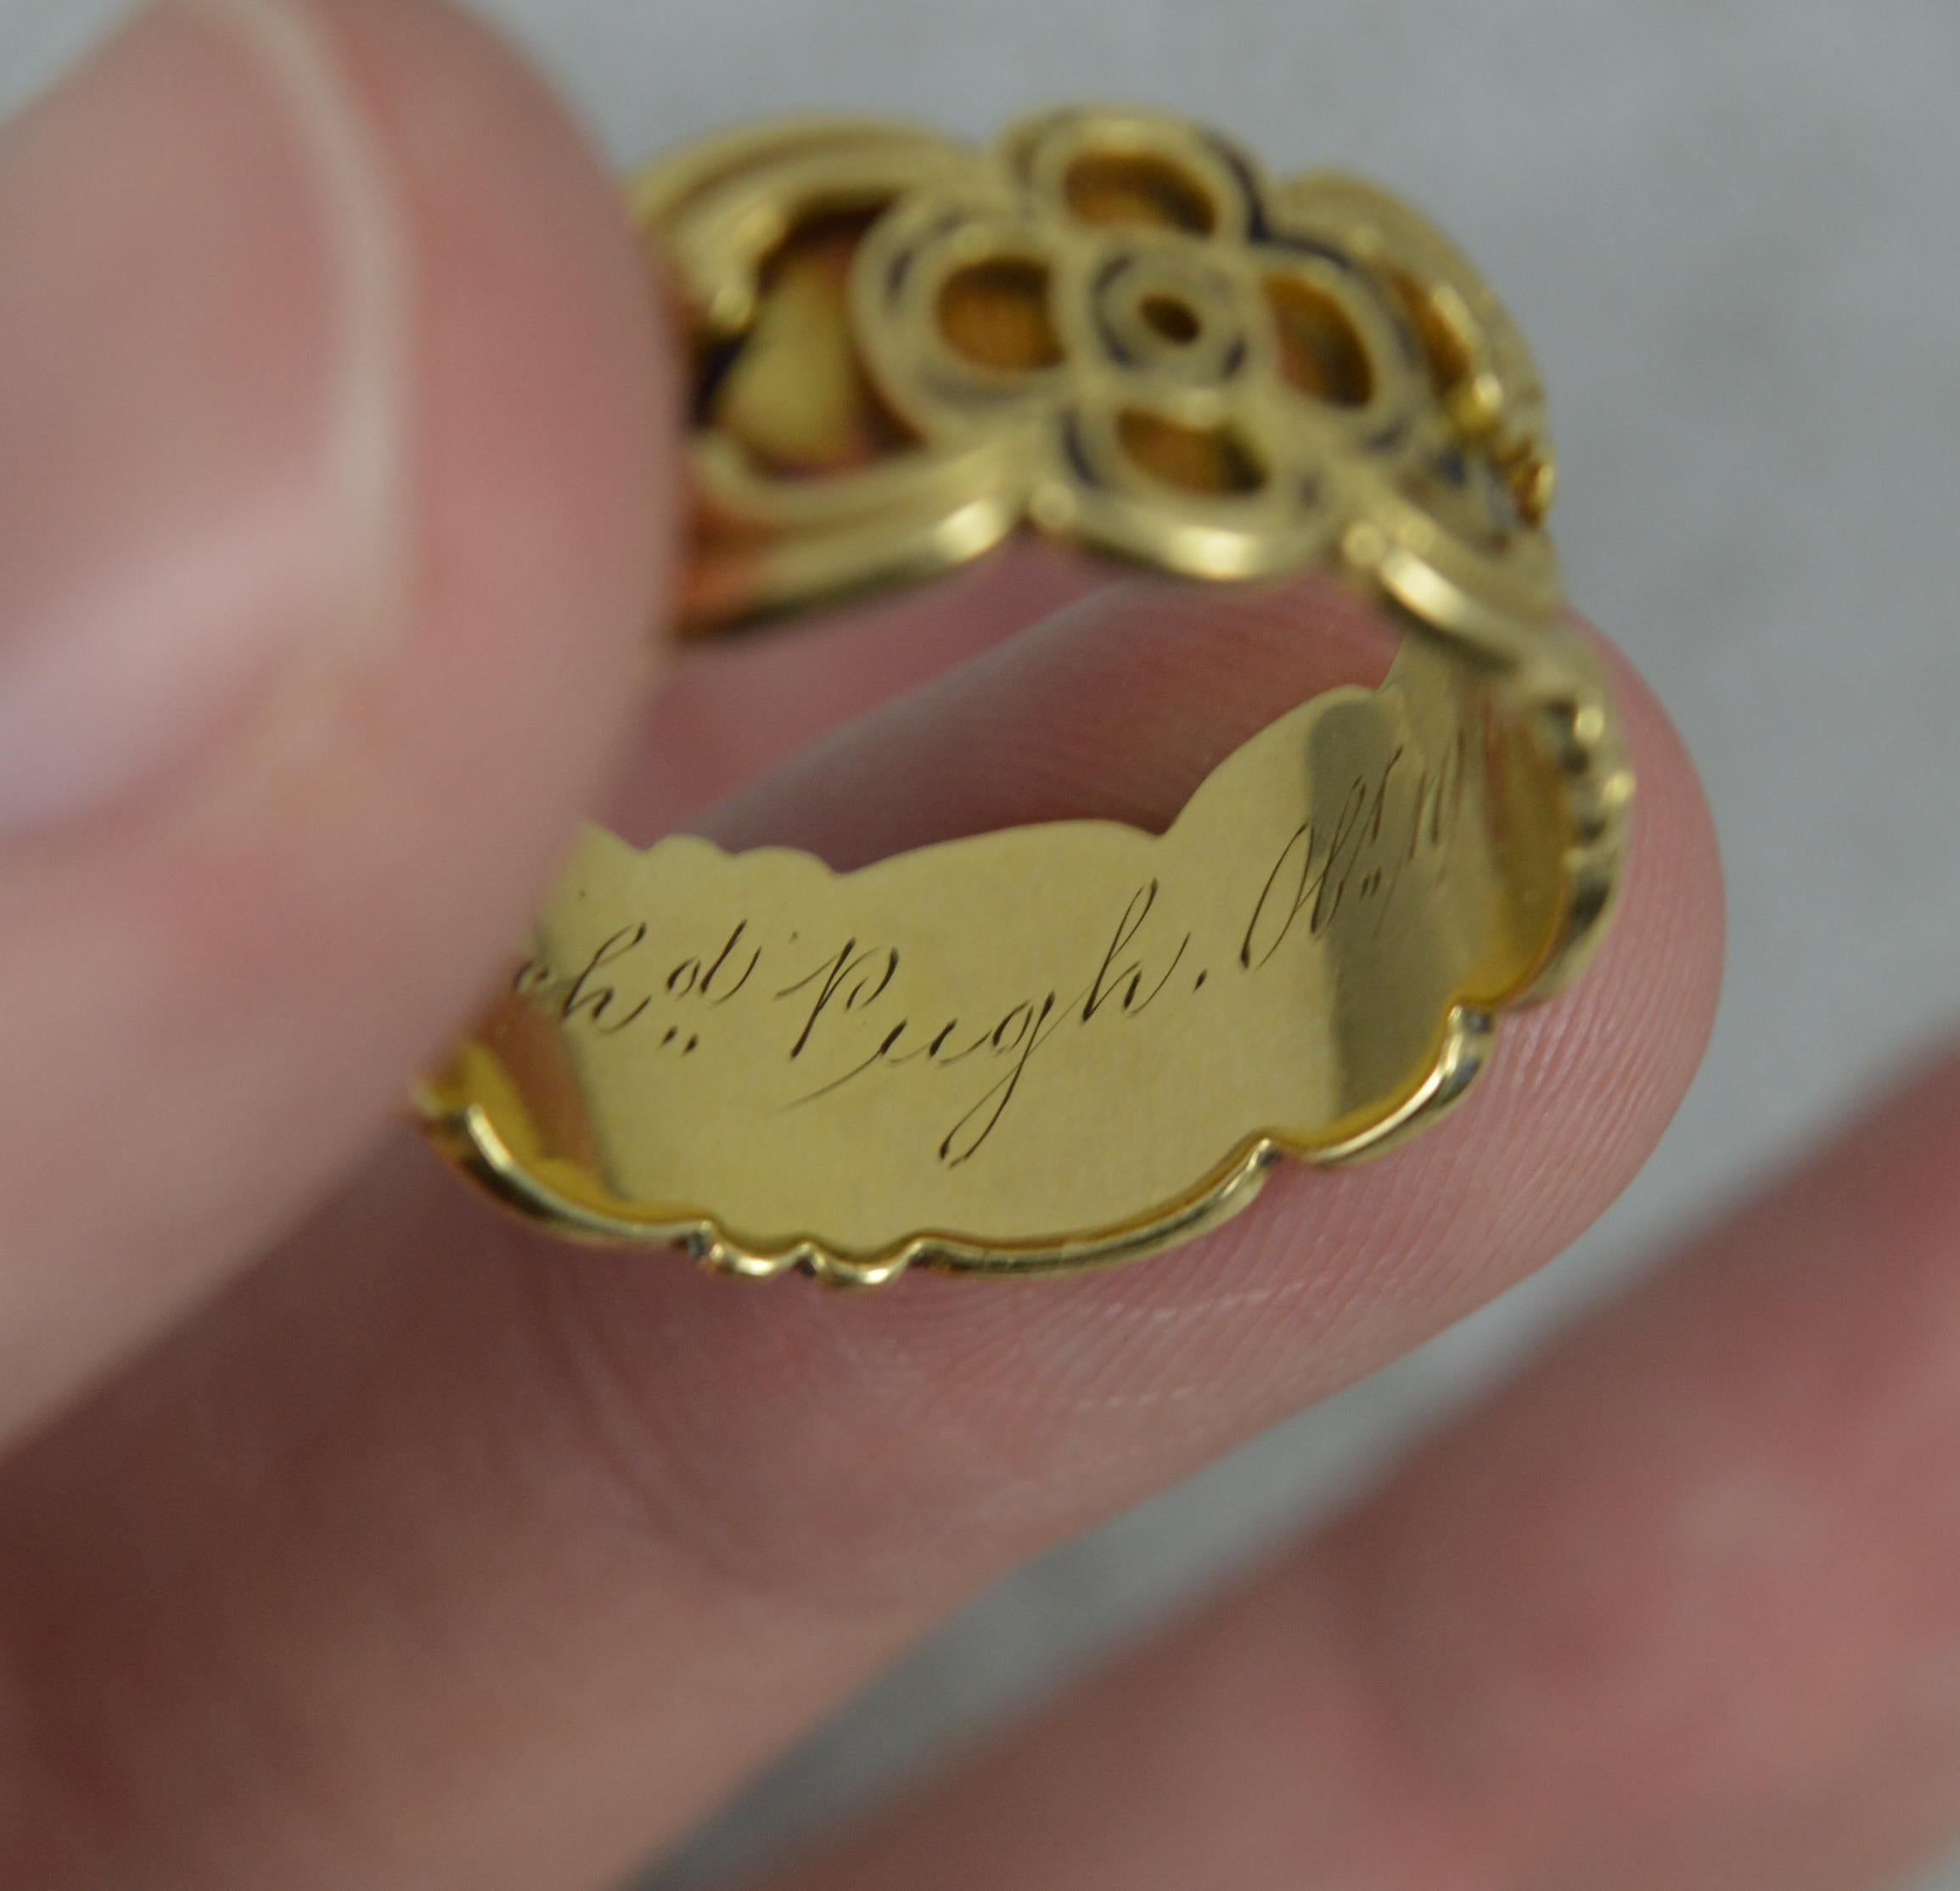 1842 Victorian 18 Carat Gold Enamel In Memory of Mourning Band Ring For Sale 1